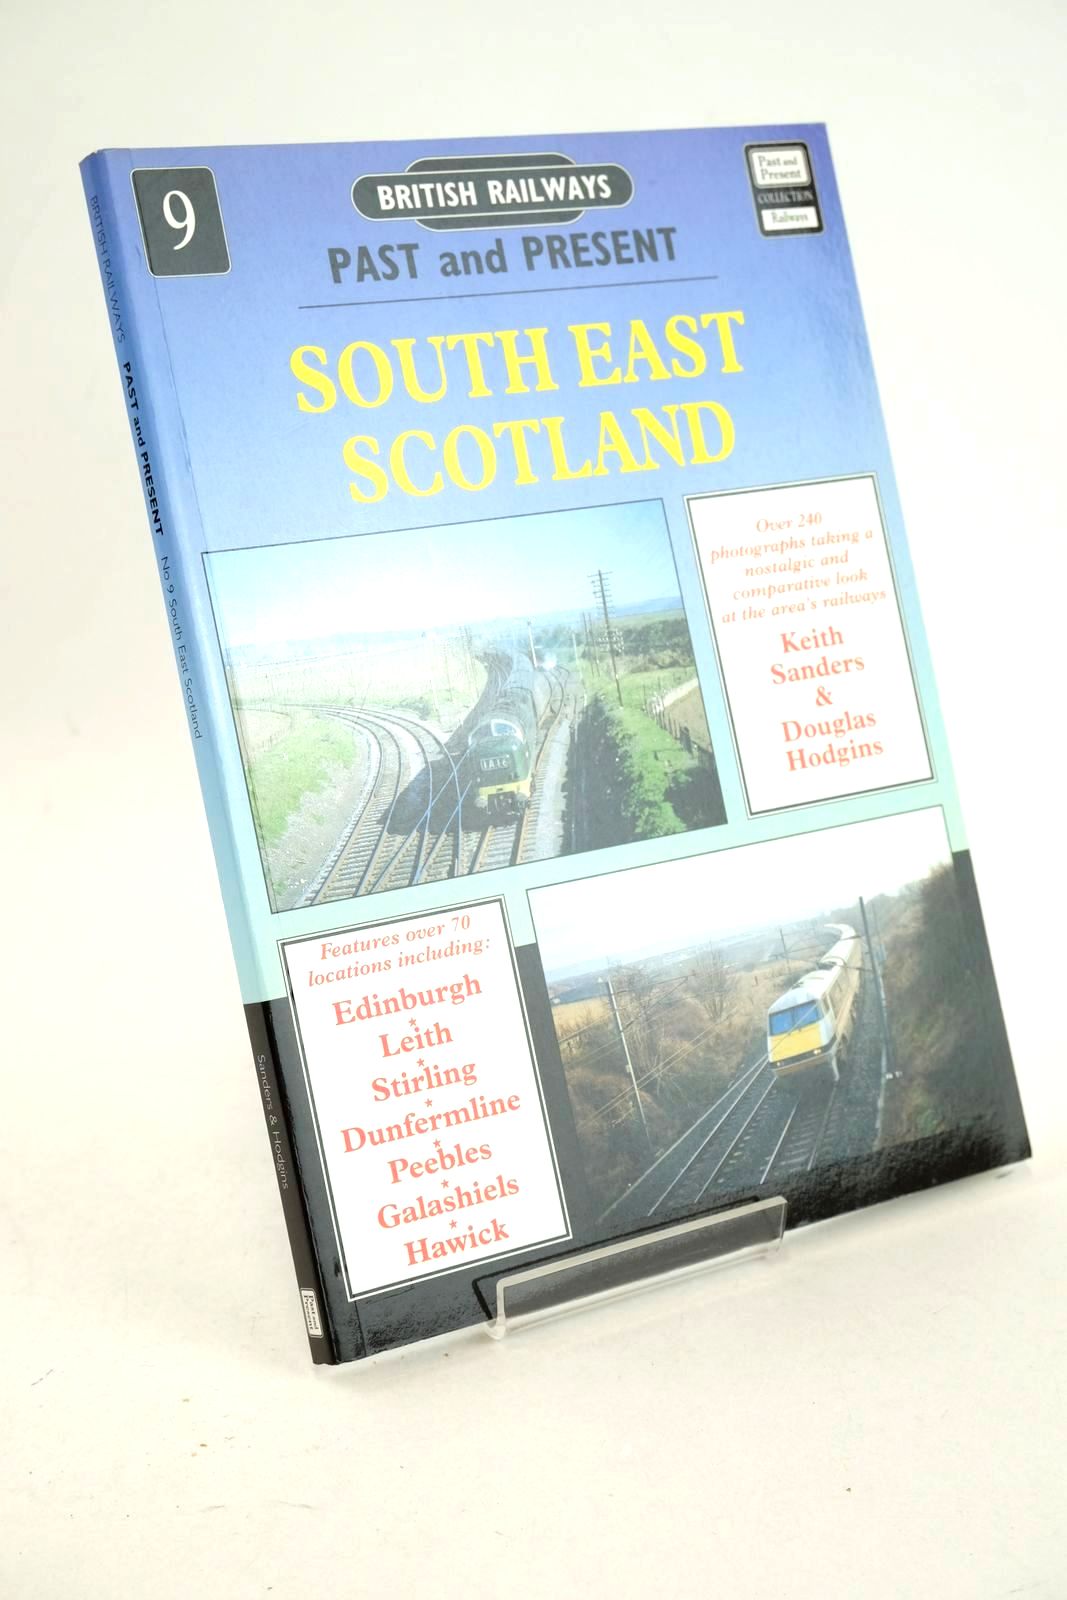 Photo of BRITISH RAILWAYS PAST AND PRESENT No. 9 SOUTH EAST SCOTLAND written by Sanders, Keith Hodgins, Douglas published by Past and Present Publishing Ltd. (STOCK CODE: 1327072)  for sale by Stella & Rose's Books